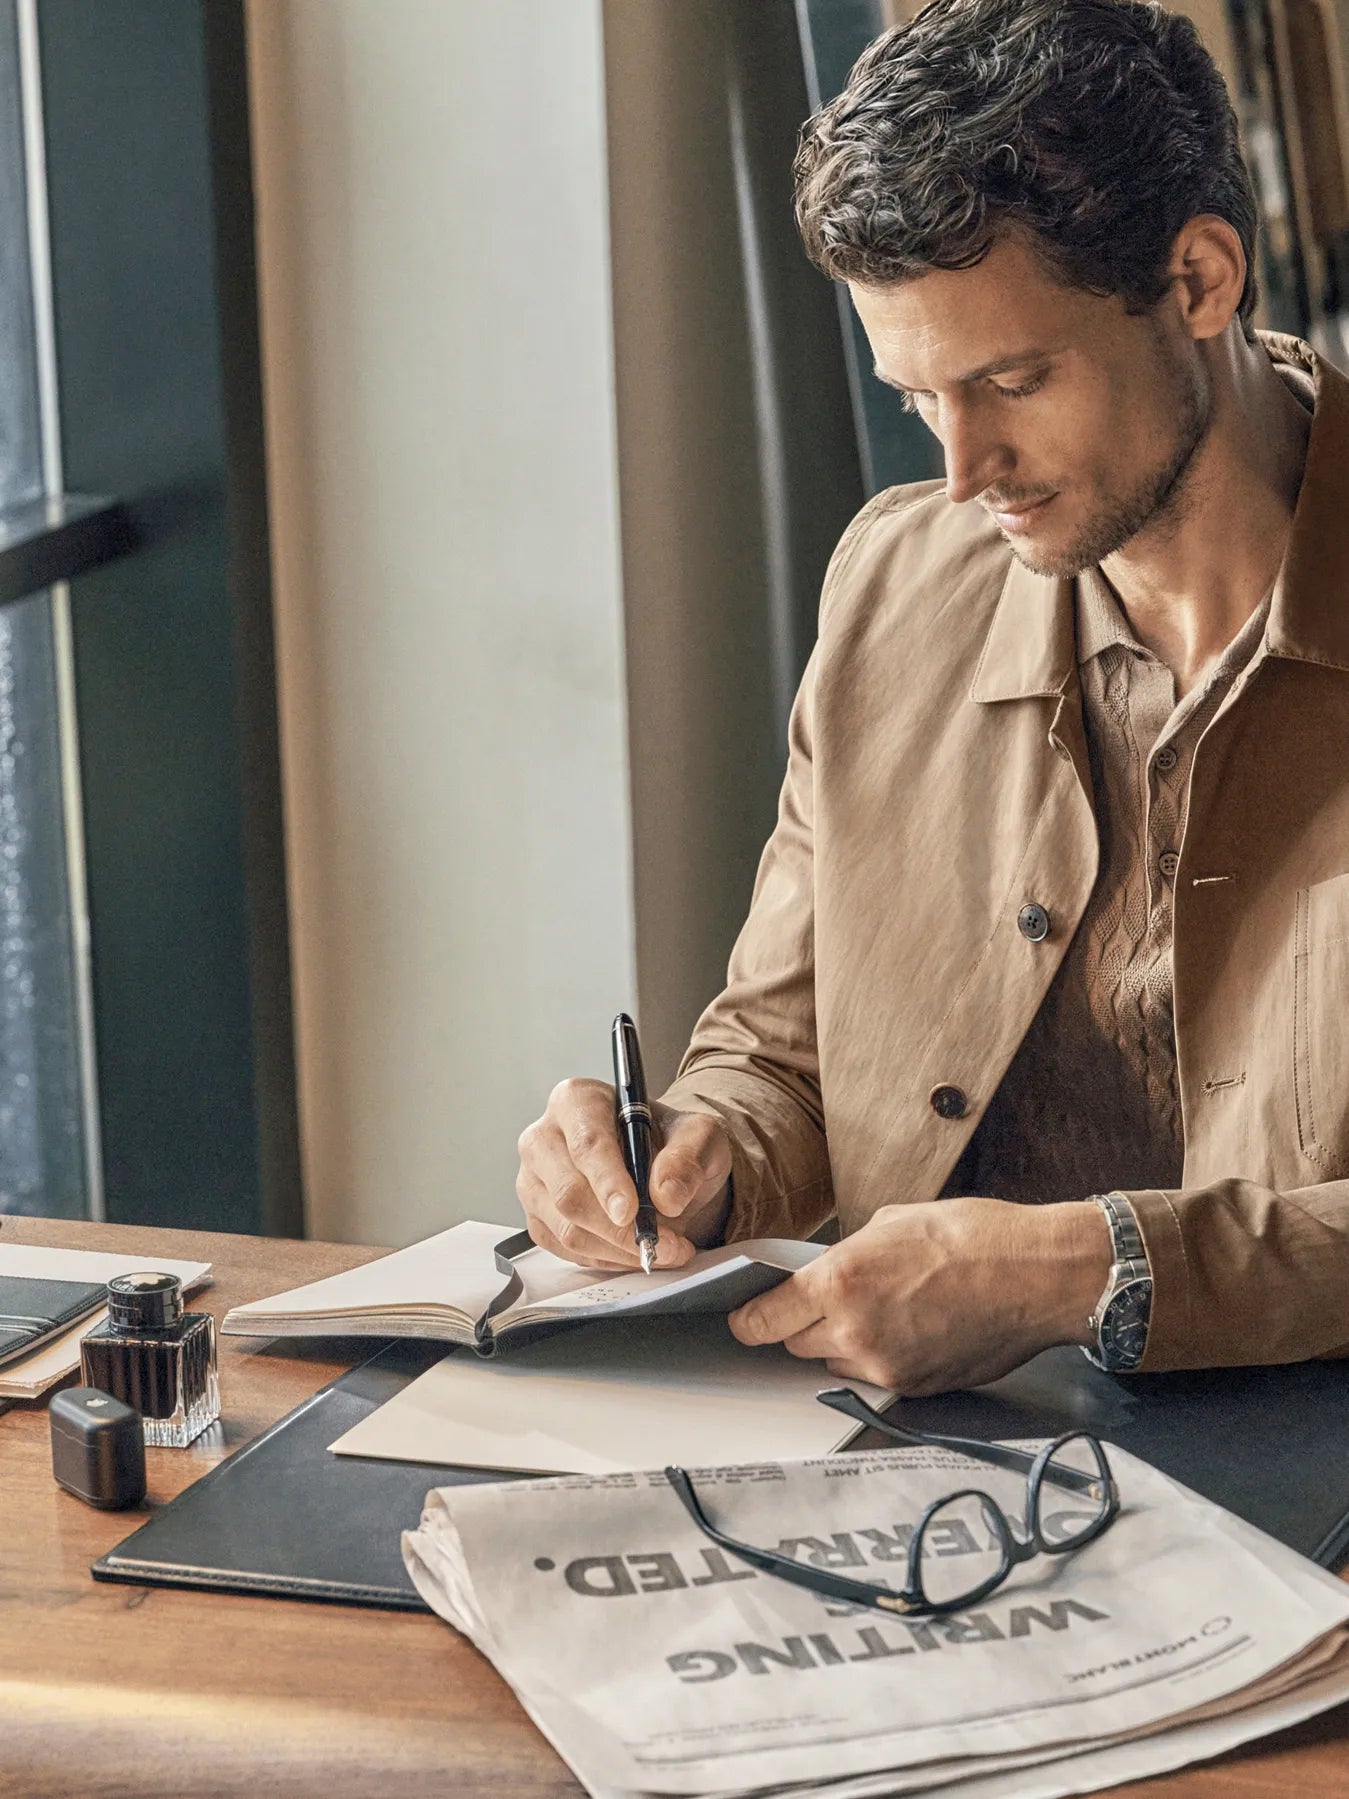 Experience craftsmanship with the Montblanc Meisterstück pen as a gentleman writes in his journal. Elevate your writing experience with Montblanc's luxury pens, combining style and precision for timeless expression.